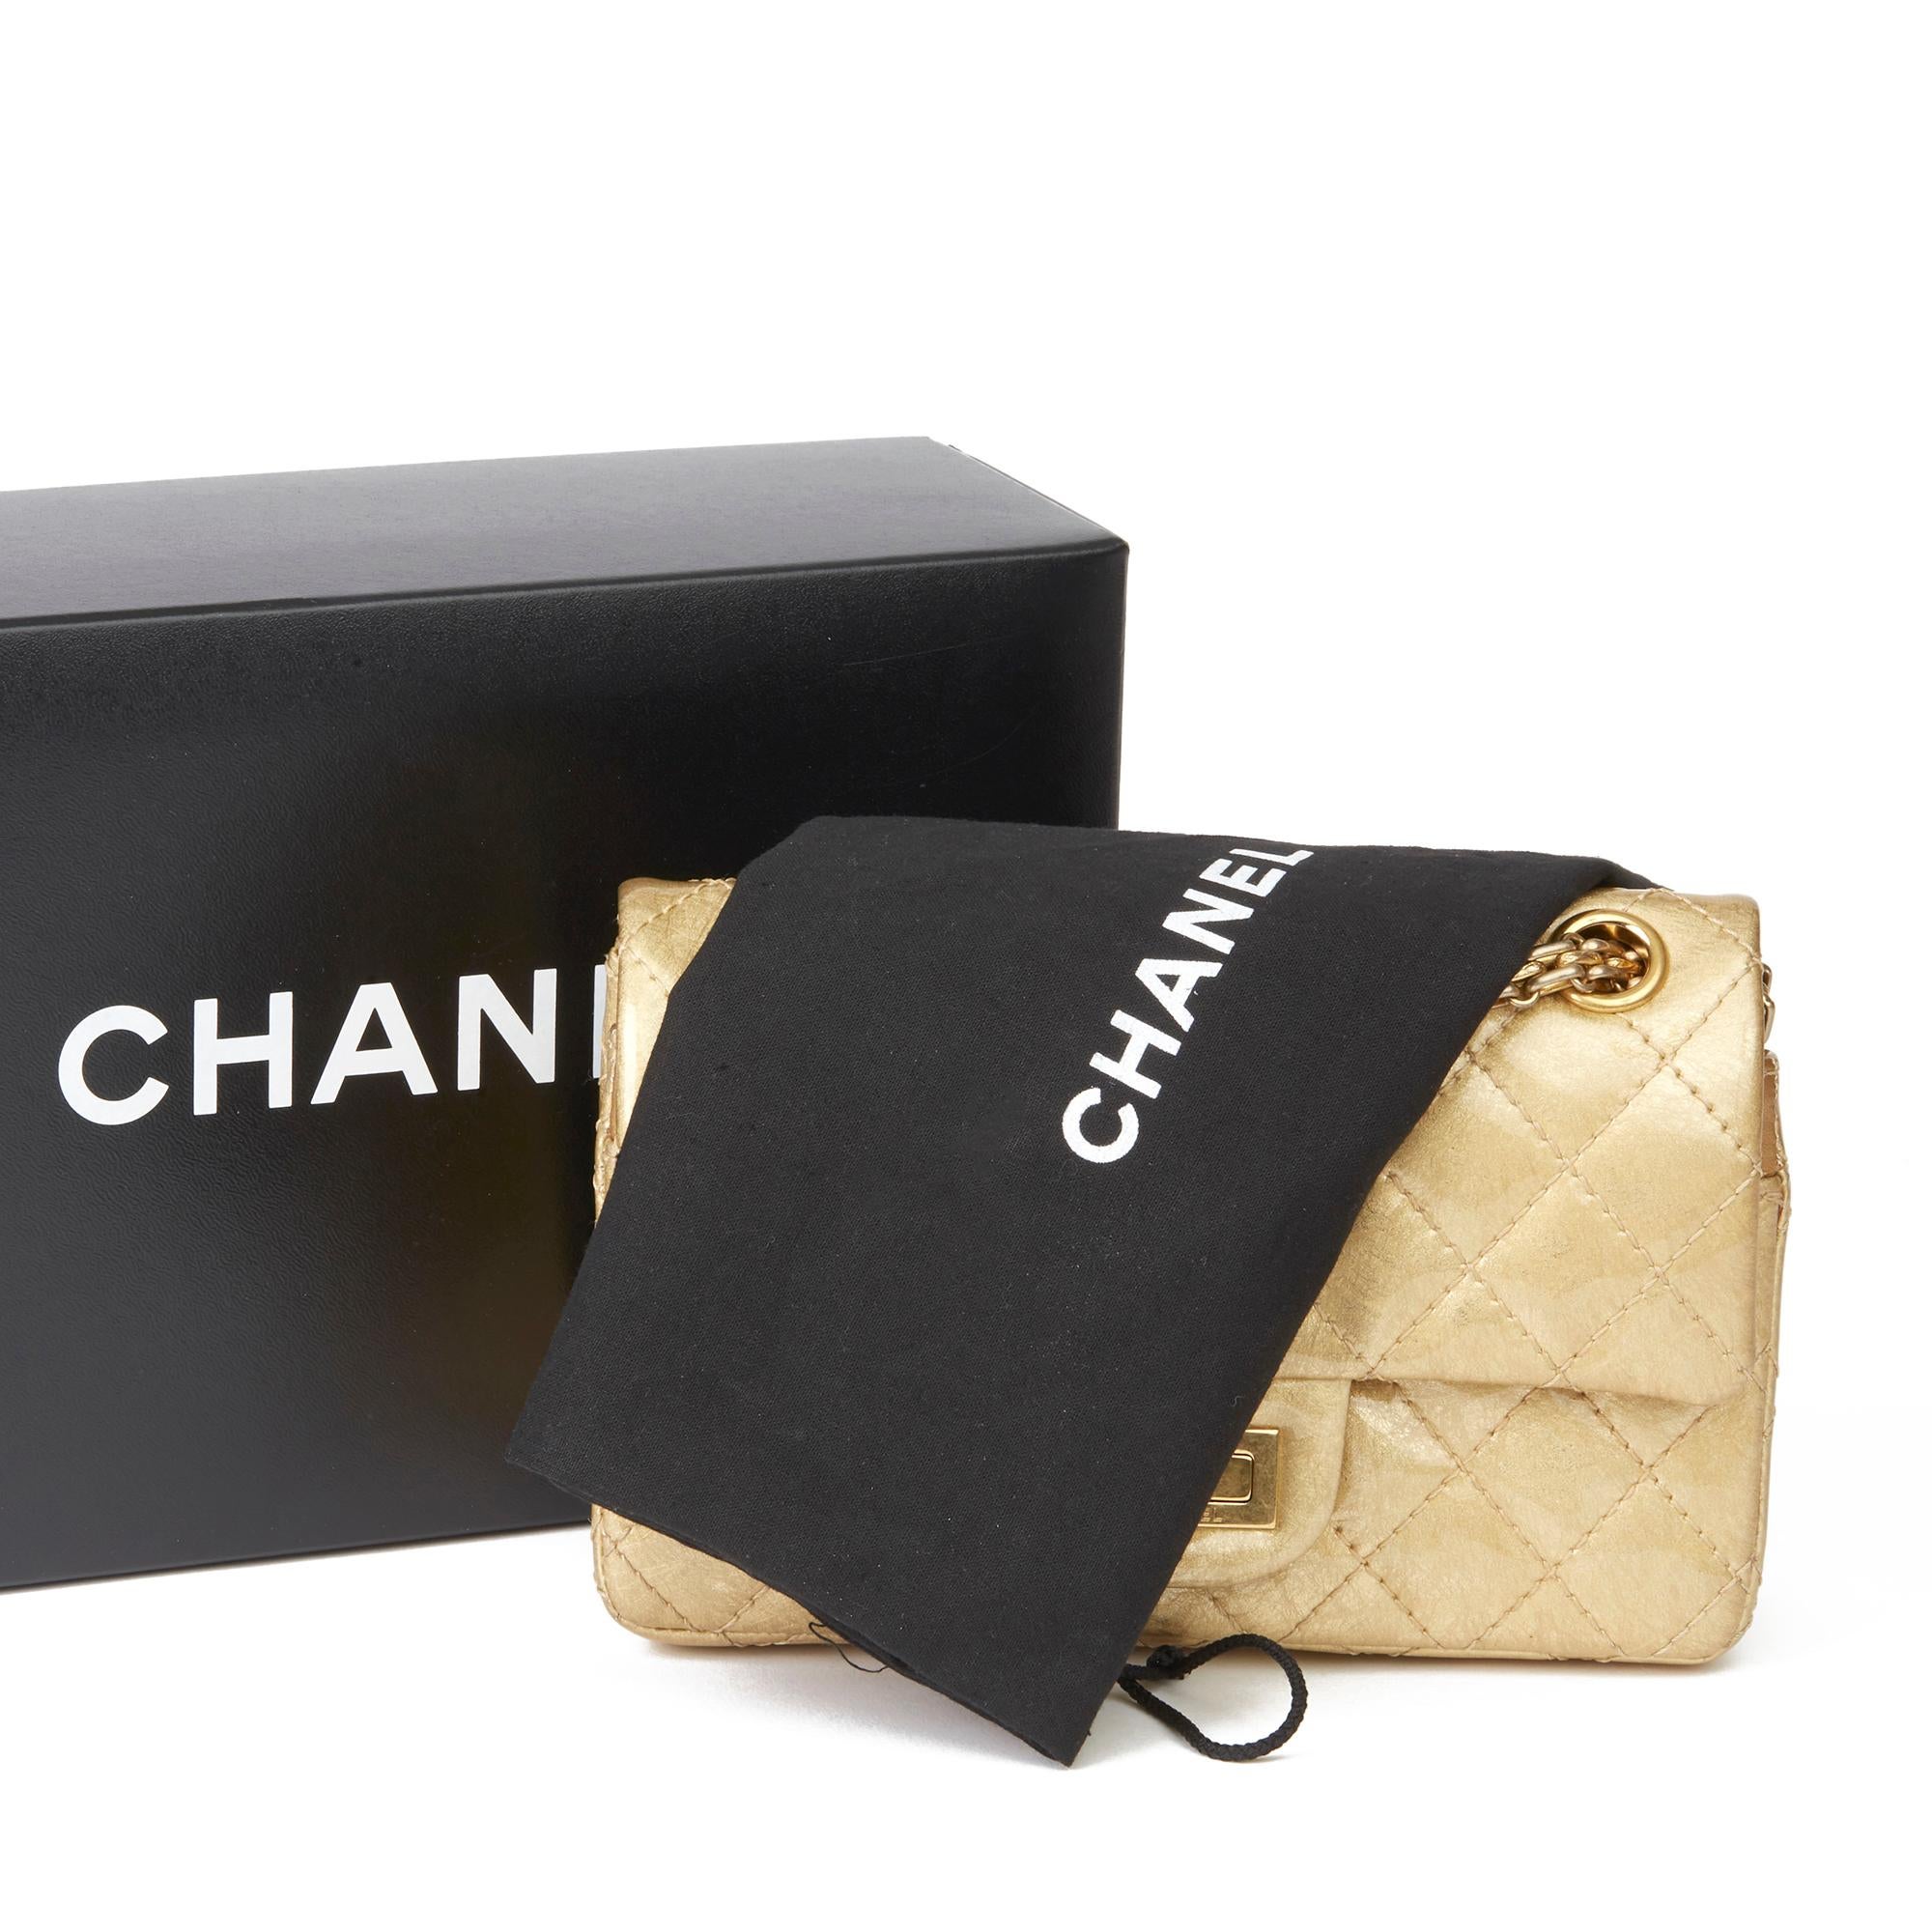 2010 Chanel Gold Quilted Metallic Aged Patent Leather Reissue Double Flap Bag 7